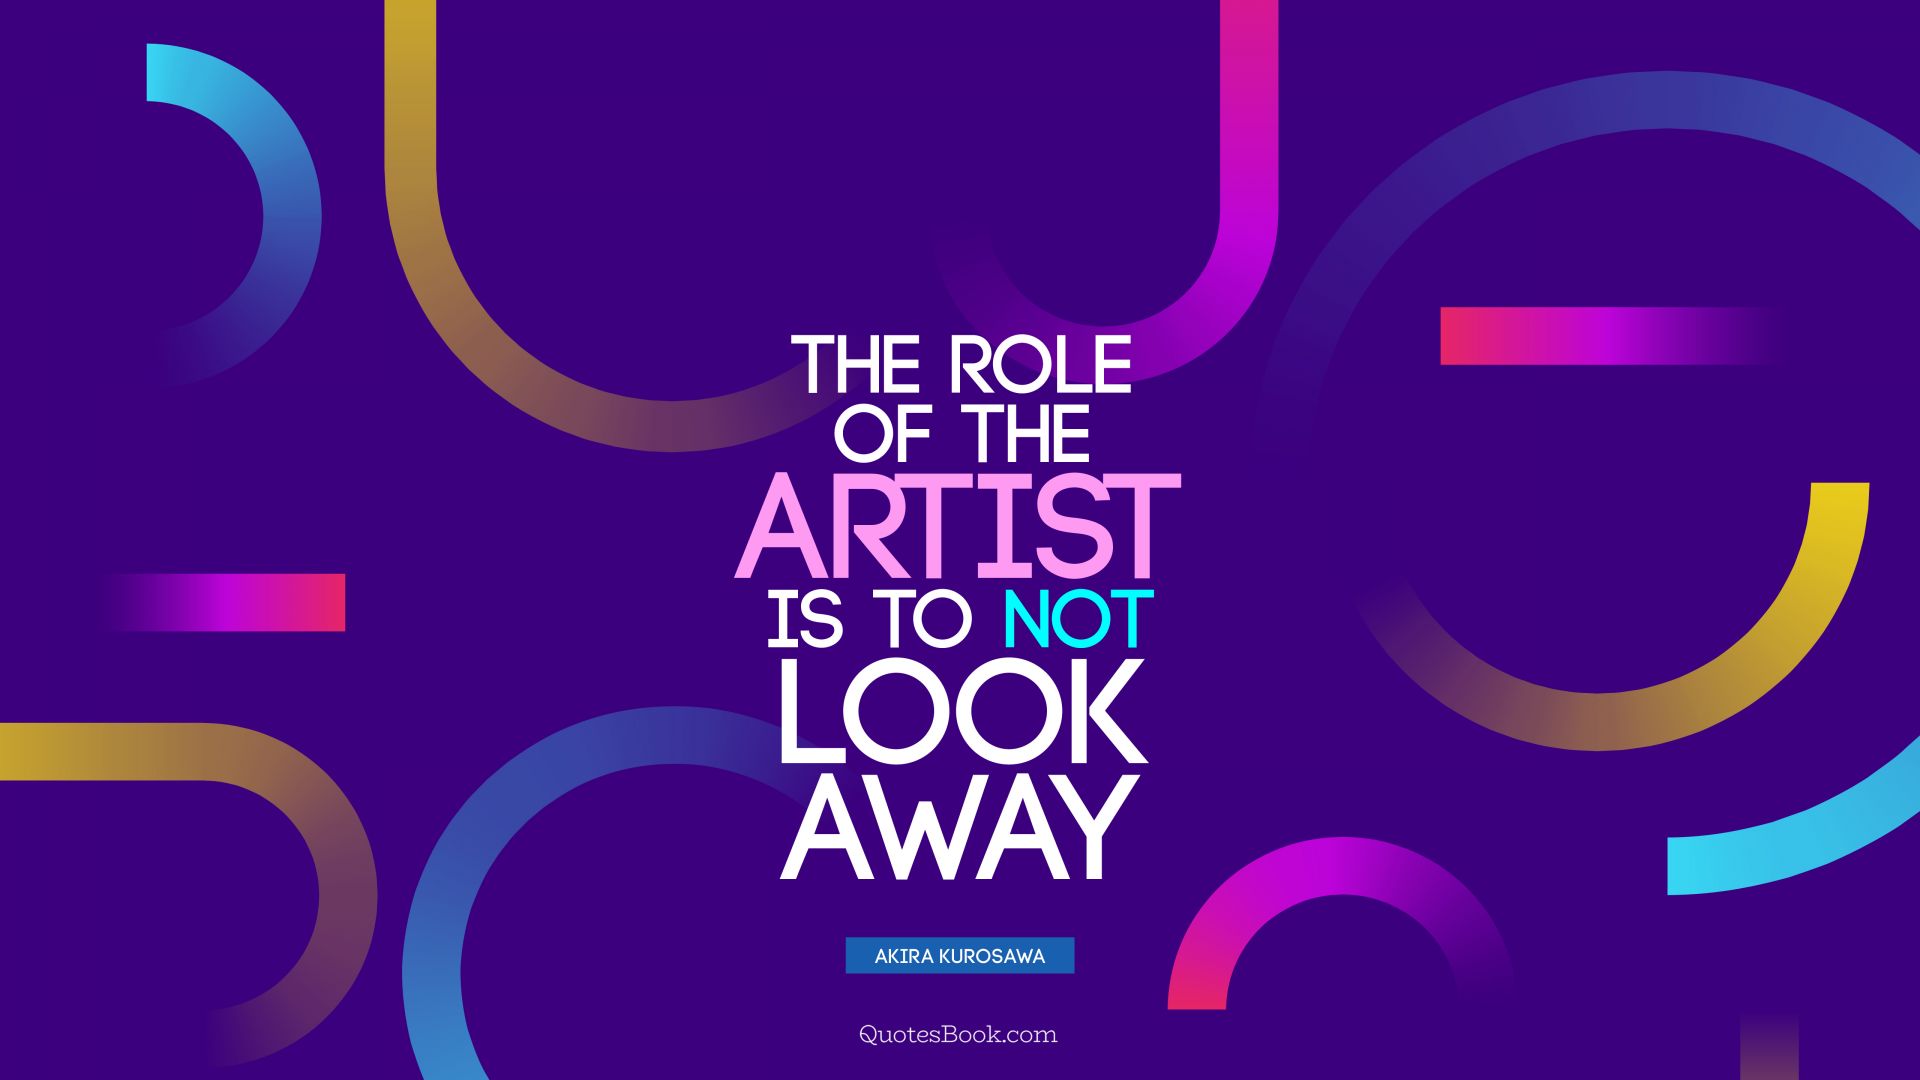 The role of the artist is to not look away. - Quote by Akira Kurosawa